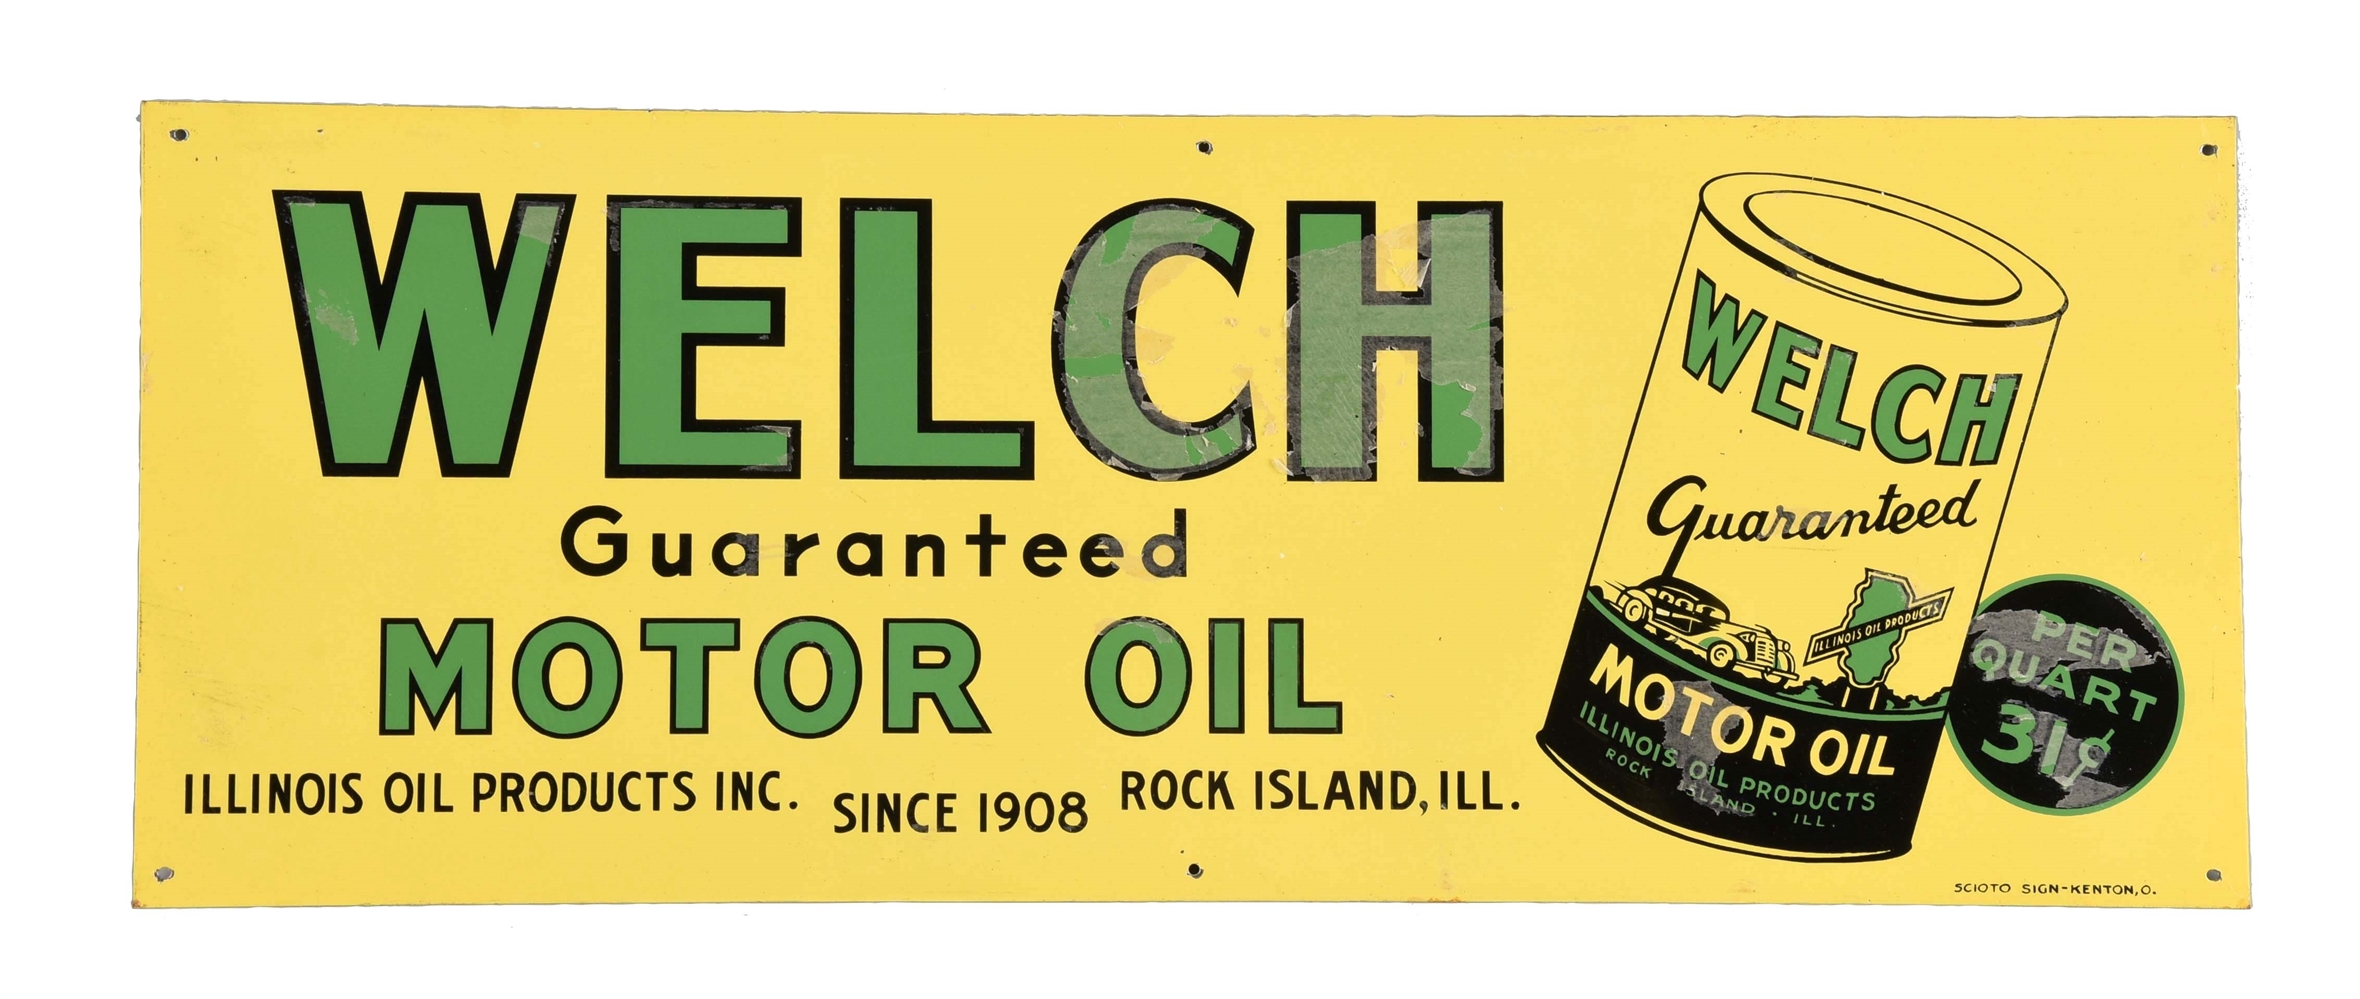 WELCH MOTOR OIL W/ CAN LOGO TIN SIGN.